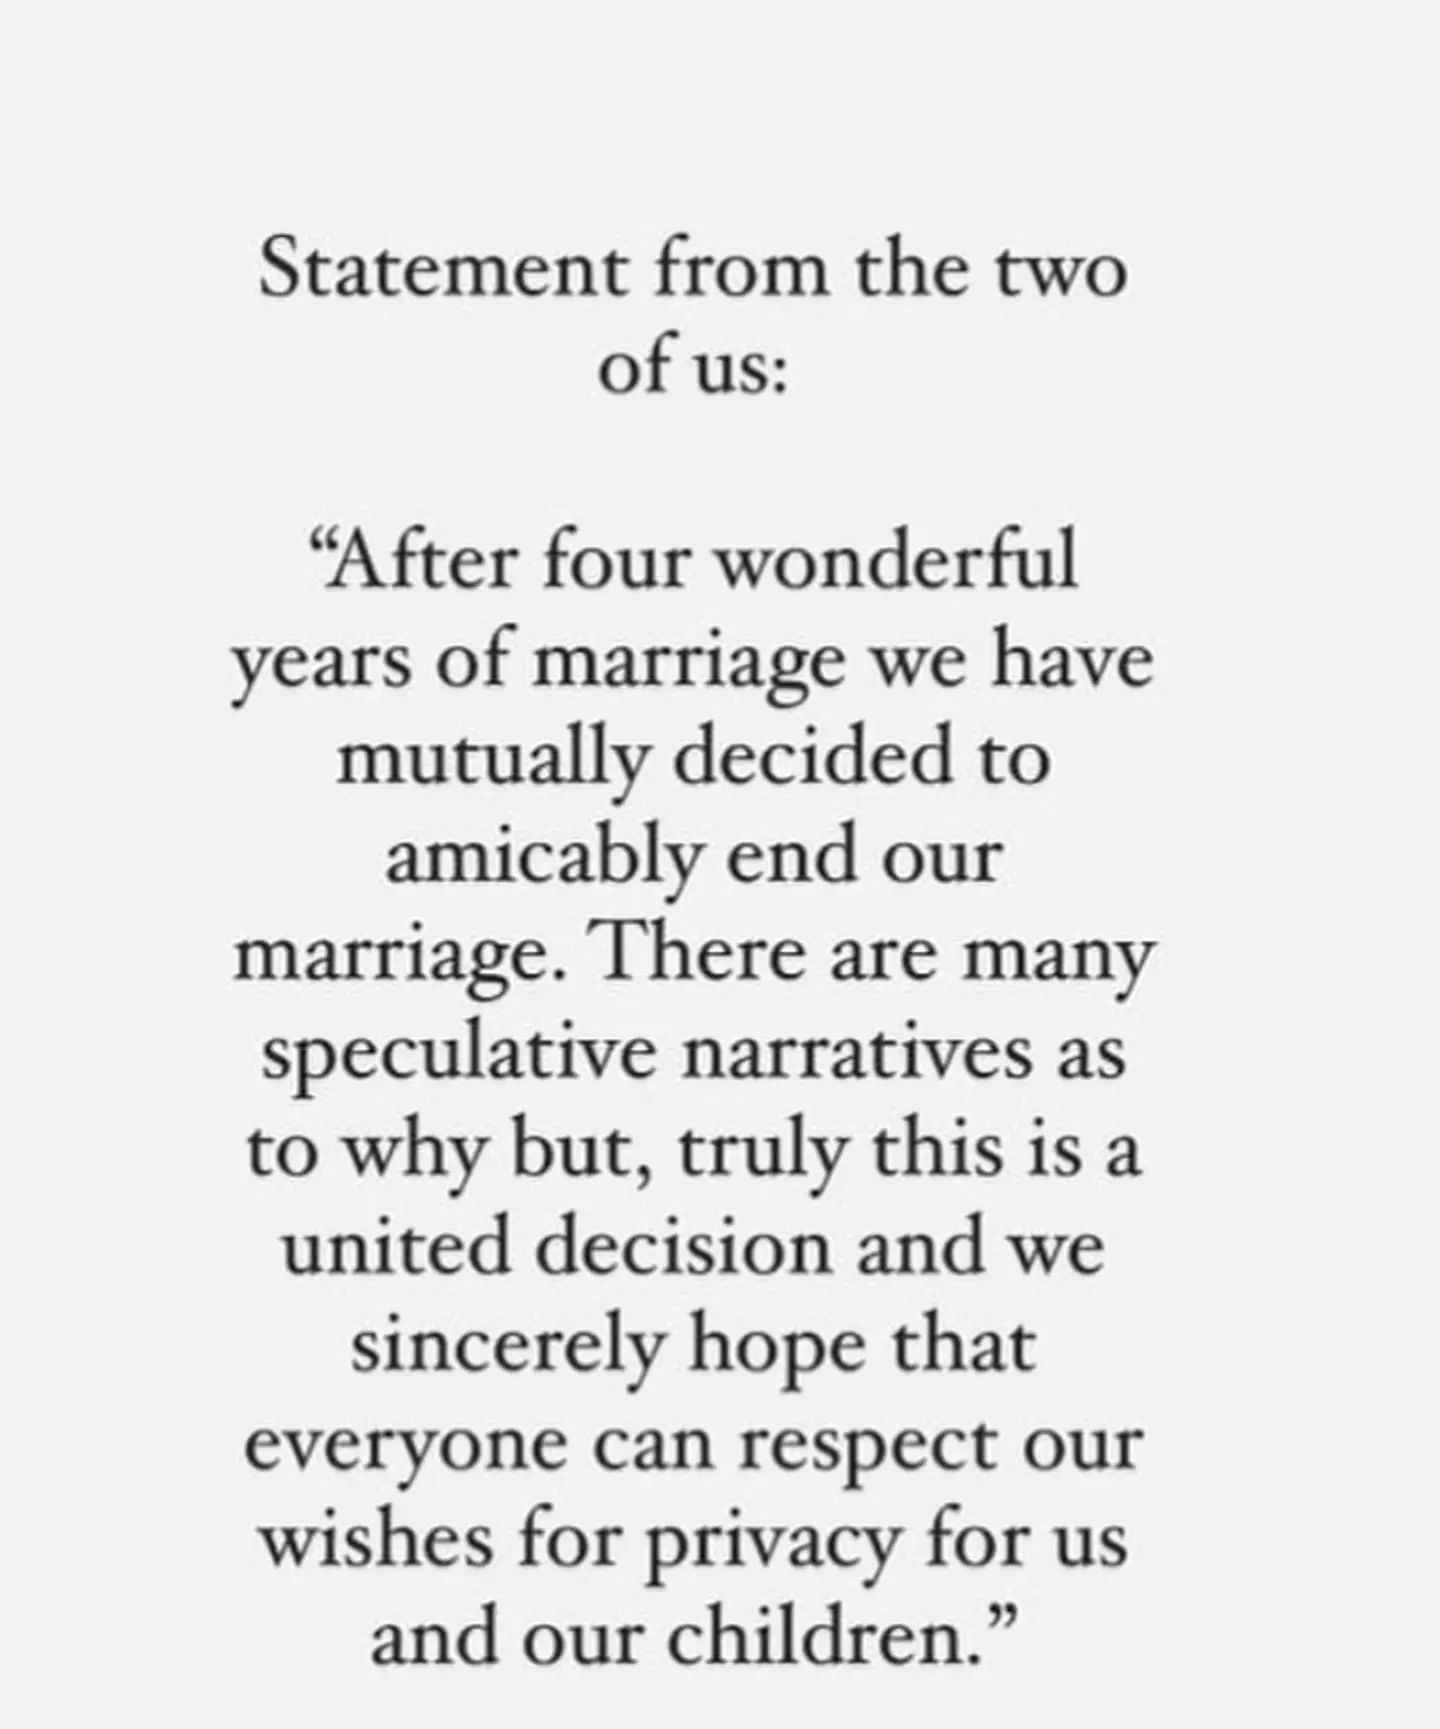 The couple released this statement to announce their divorce.